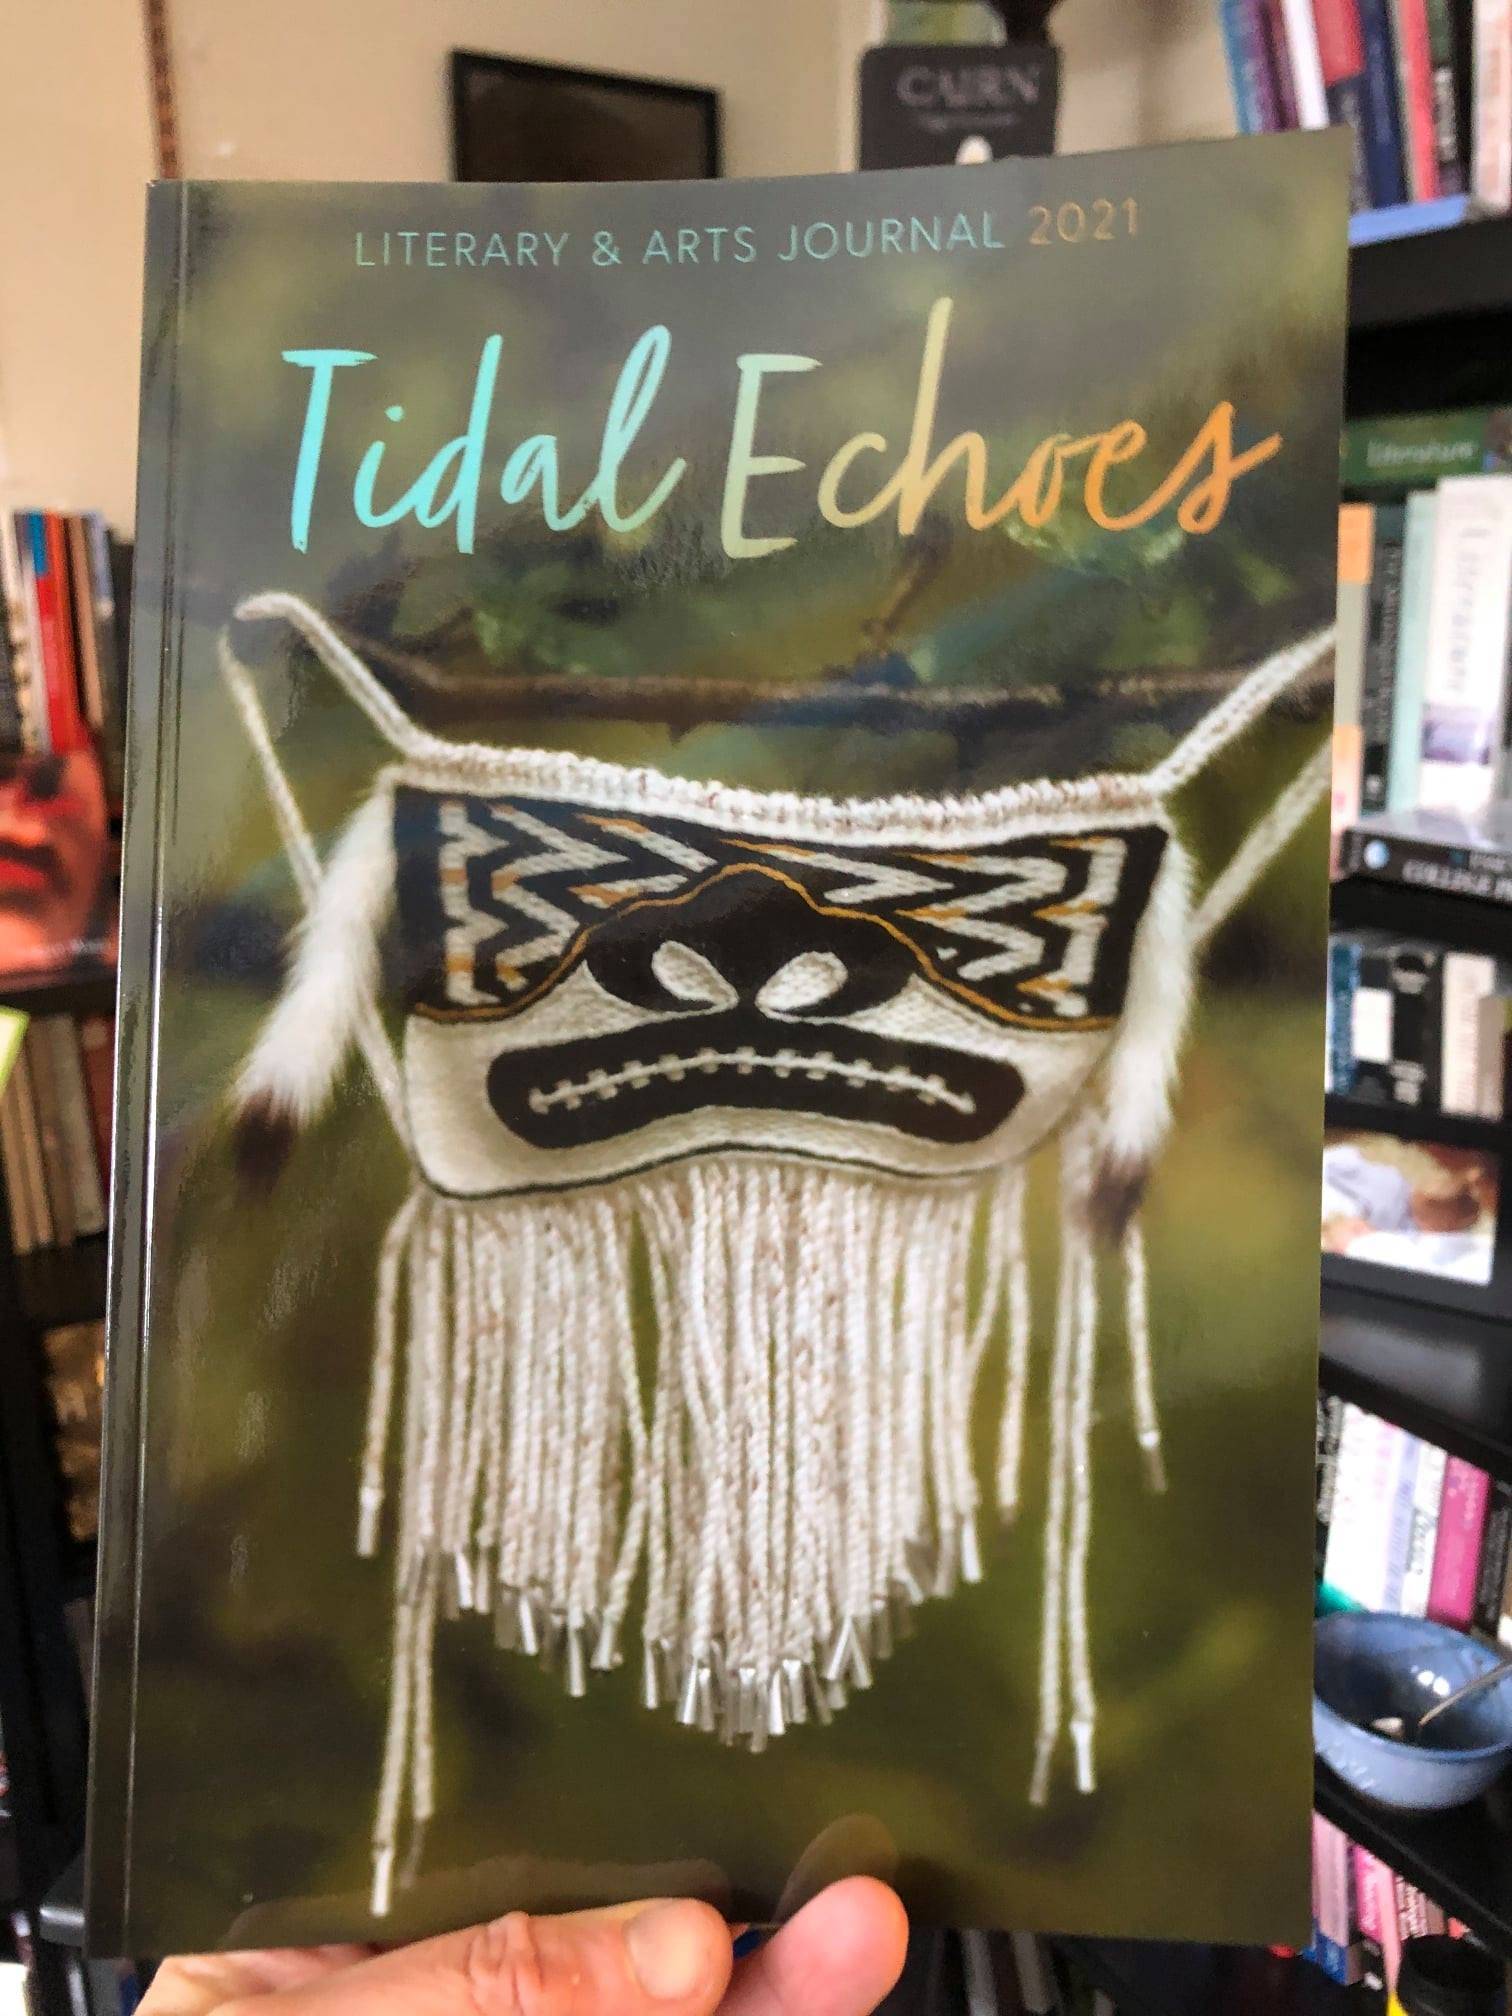 Courtesy photo / Tidal Echoes 
The University of Alaska Southeast’s arts and literary journal Tidal Echoes will drop at a digital release party on Friday.